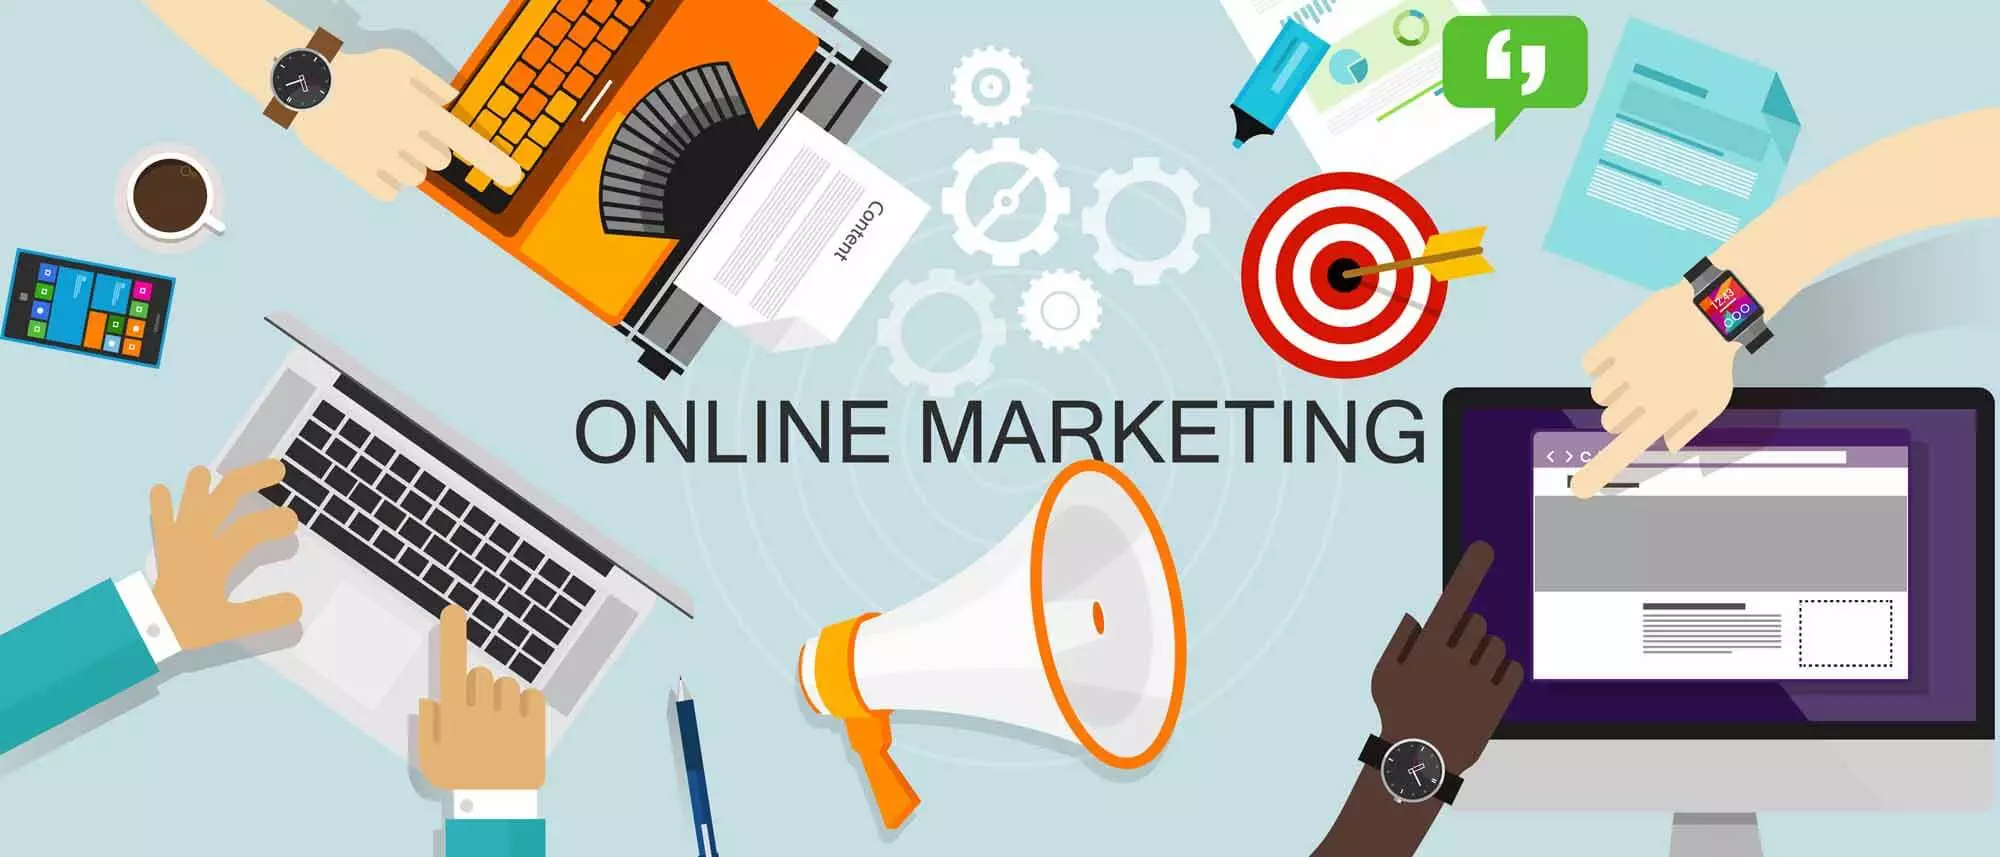 Check Out These Quick Tips For A Successful Internet Marketing Strategy!